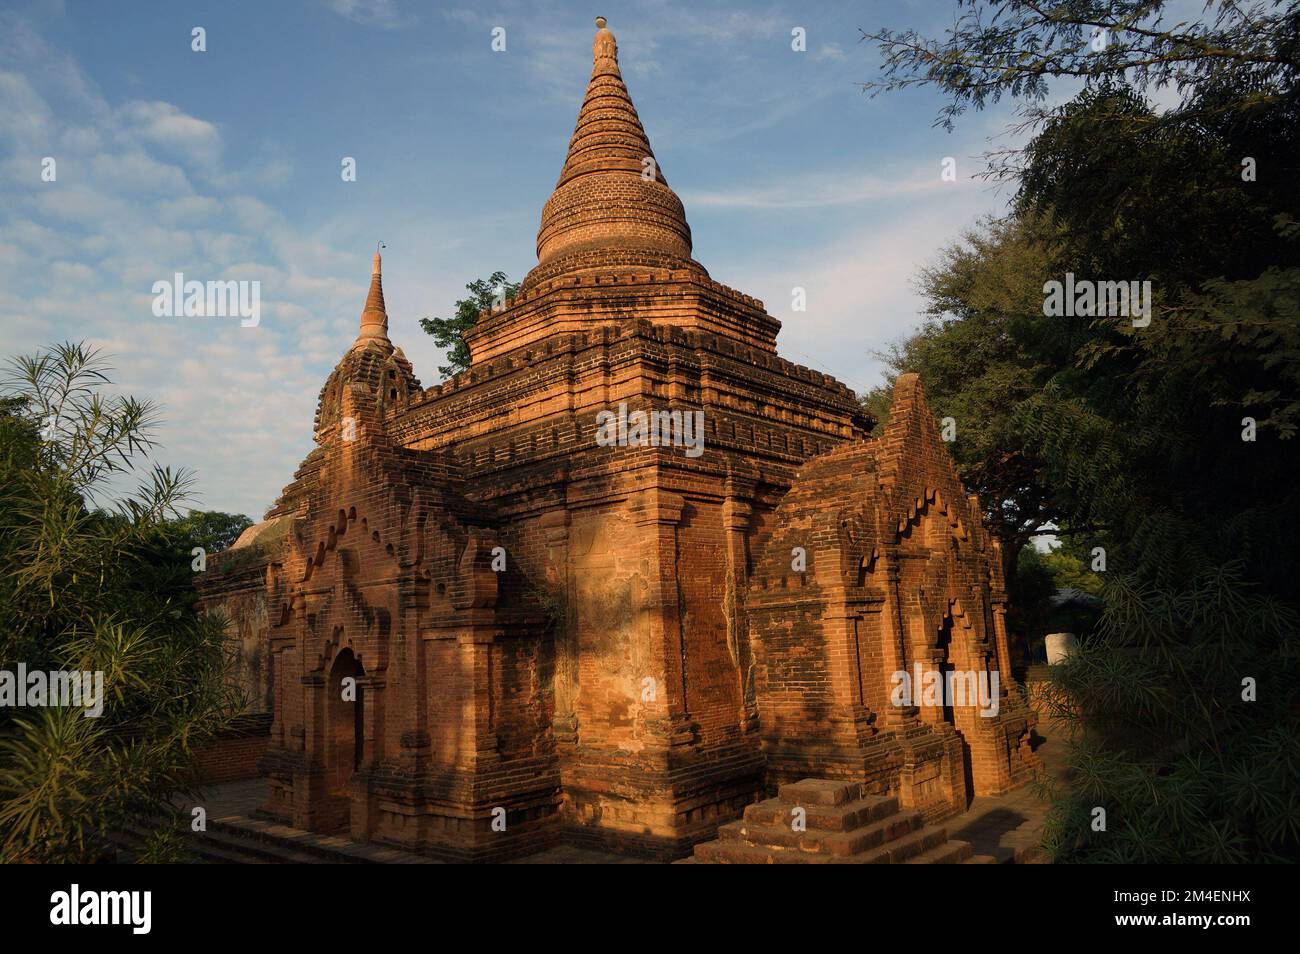 Temple near Tharabay gate, just outside the walls of Old Bagan, in the UNESCO World Heritage site of Bagan, Myanmar Stock Photo